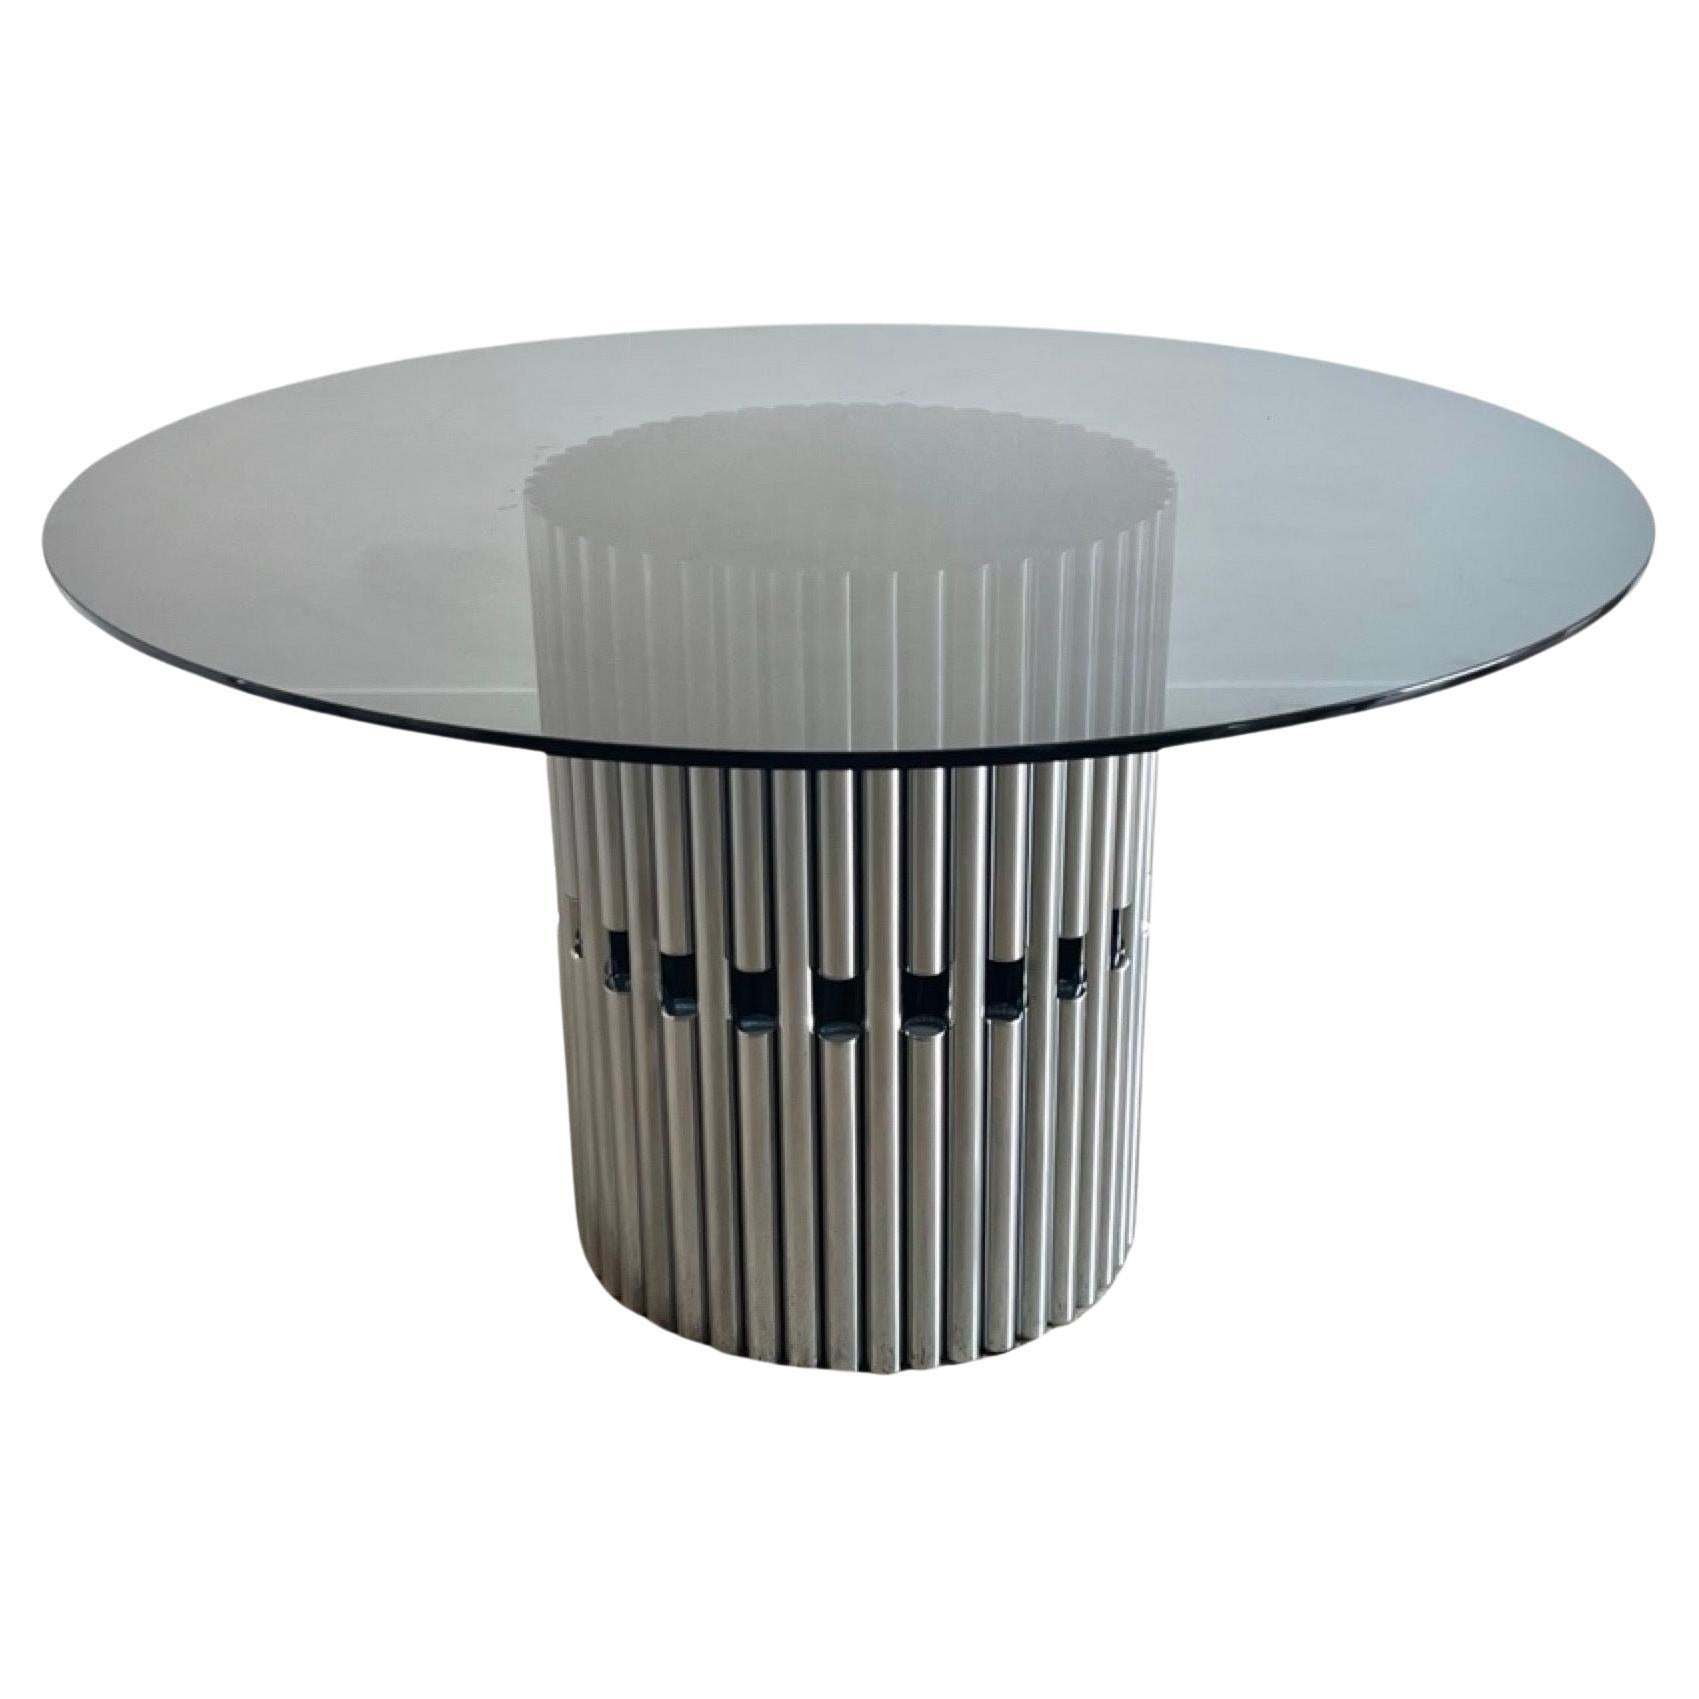 Gastone Rinaldi Smoked Glass and Chrome Dining Table For Sale